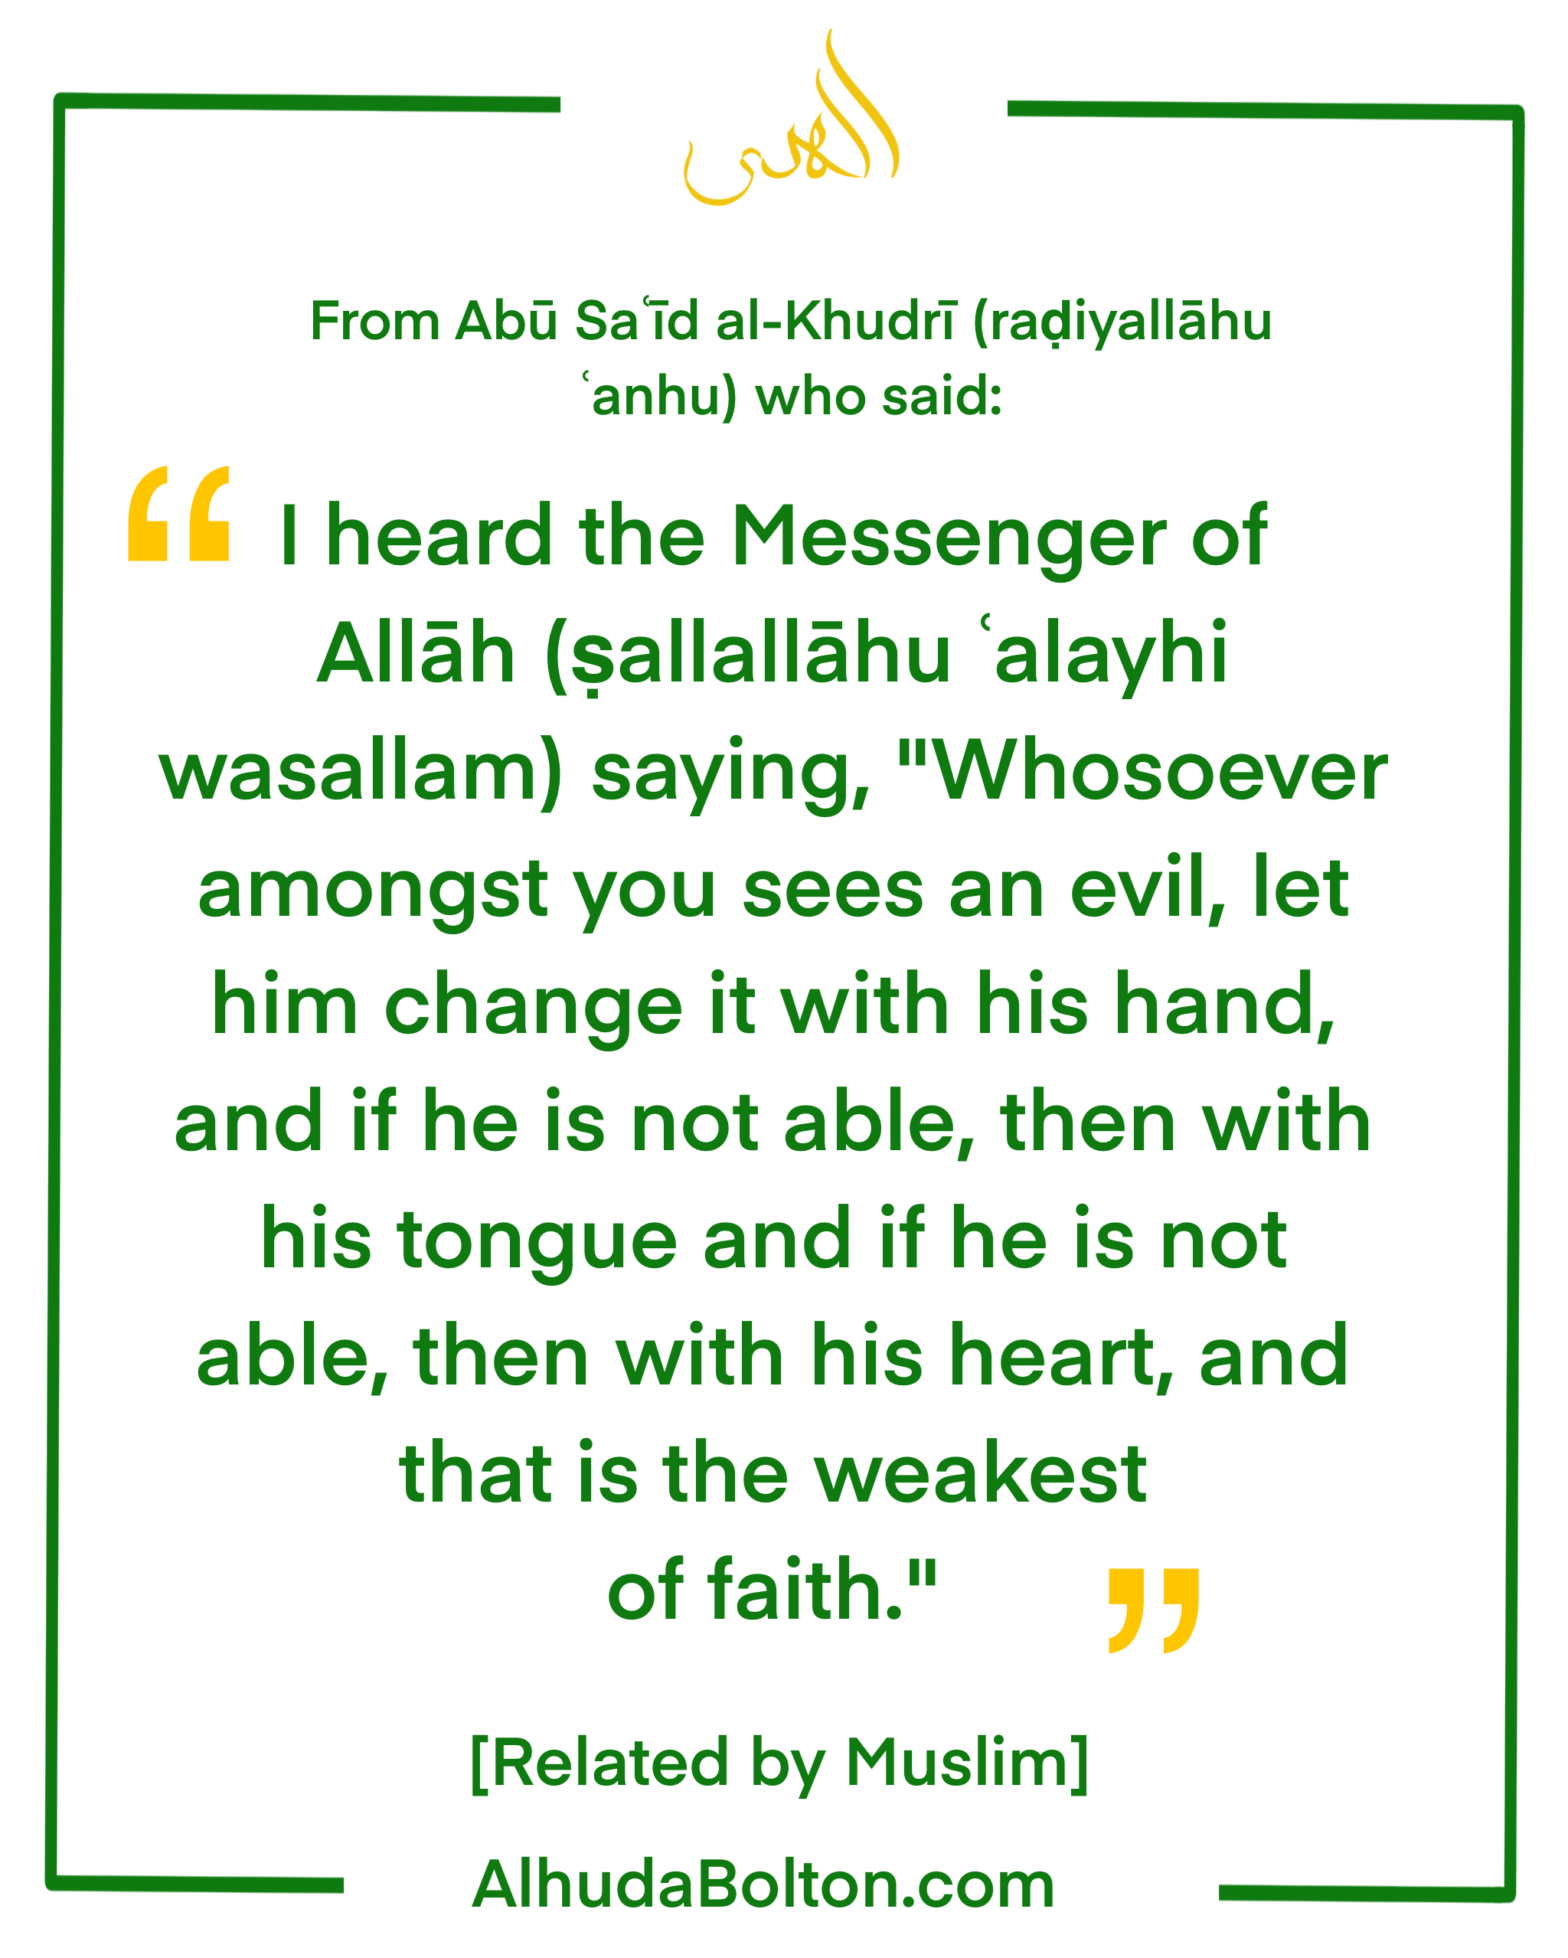 Weekly Hadith: “Whosoever amongst you sees an evil…”